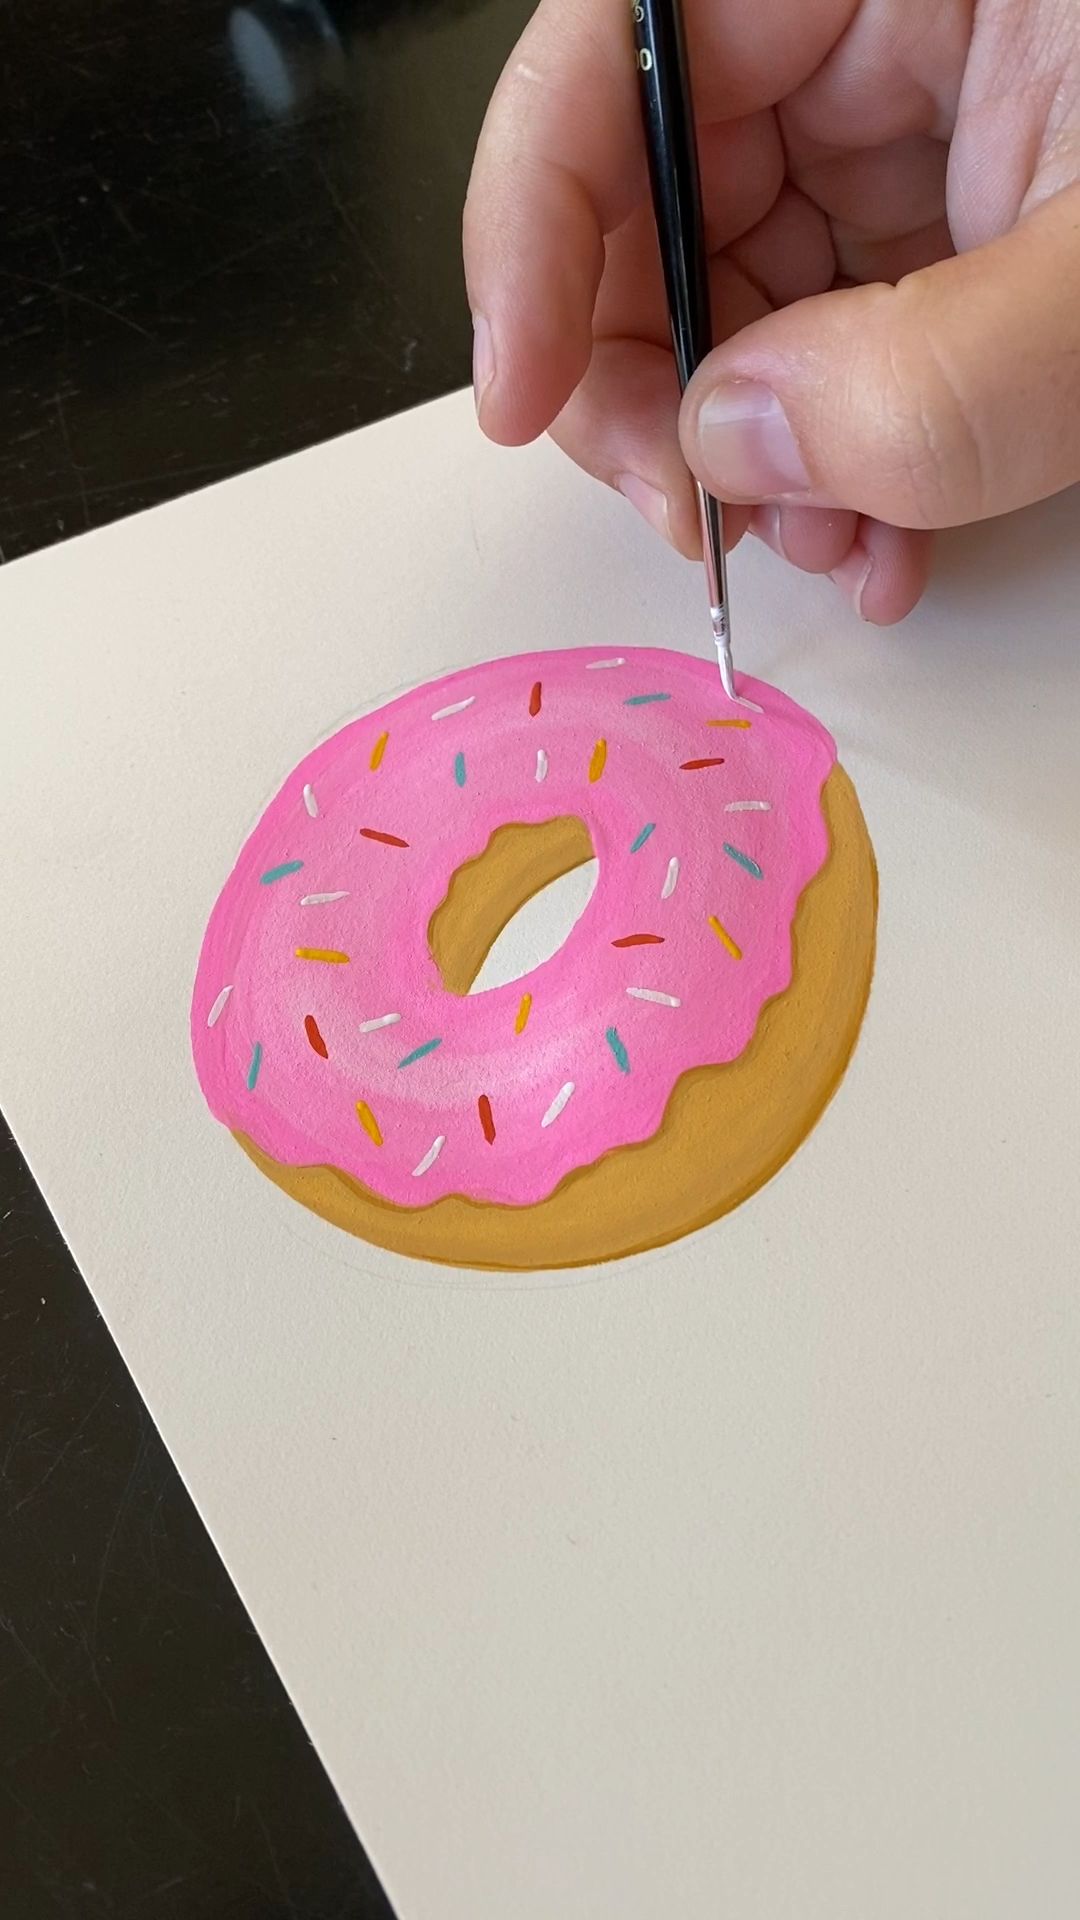 🍩 Donut give up painting. Practice makes perfect.